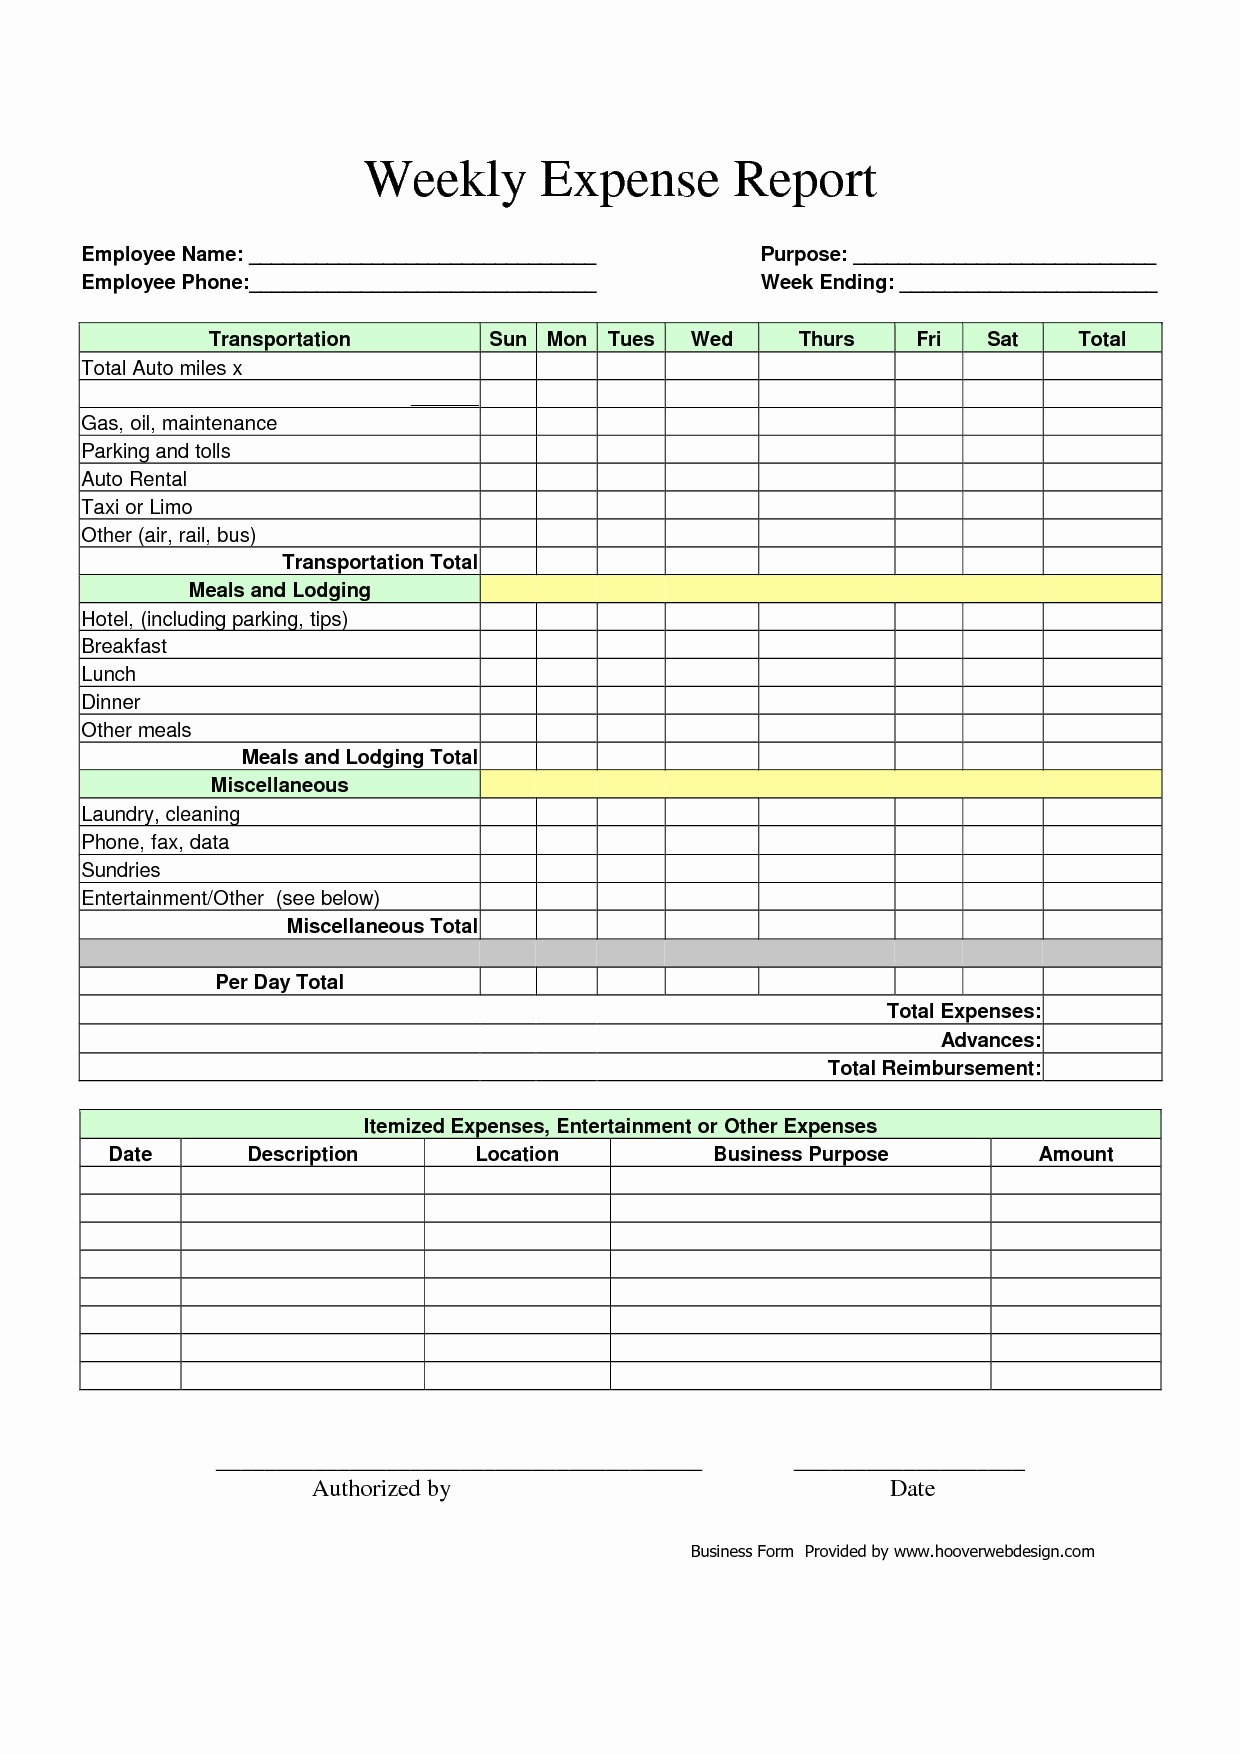 Excel Expense Report Template Free Unique Blank Expense Report Portablegasgrillweber